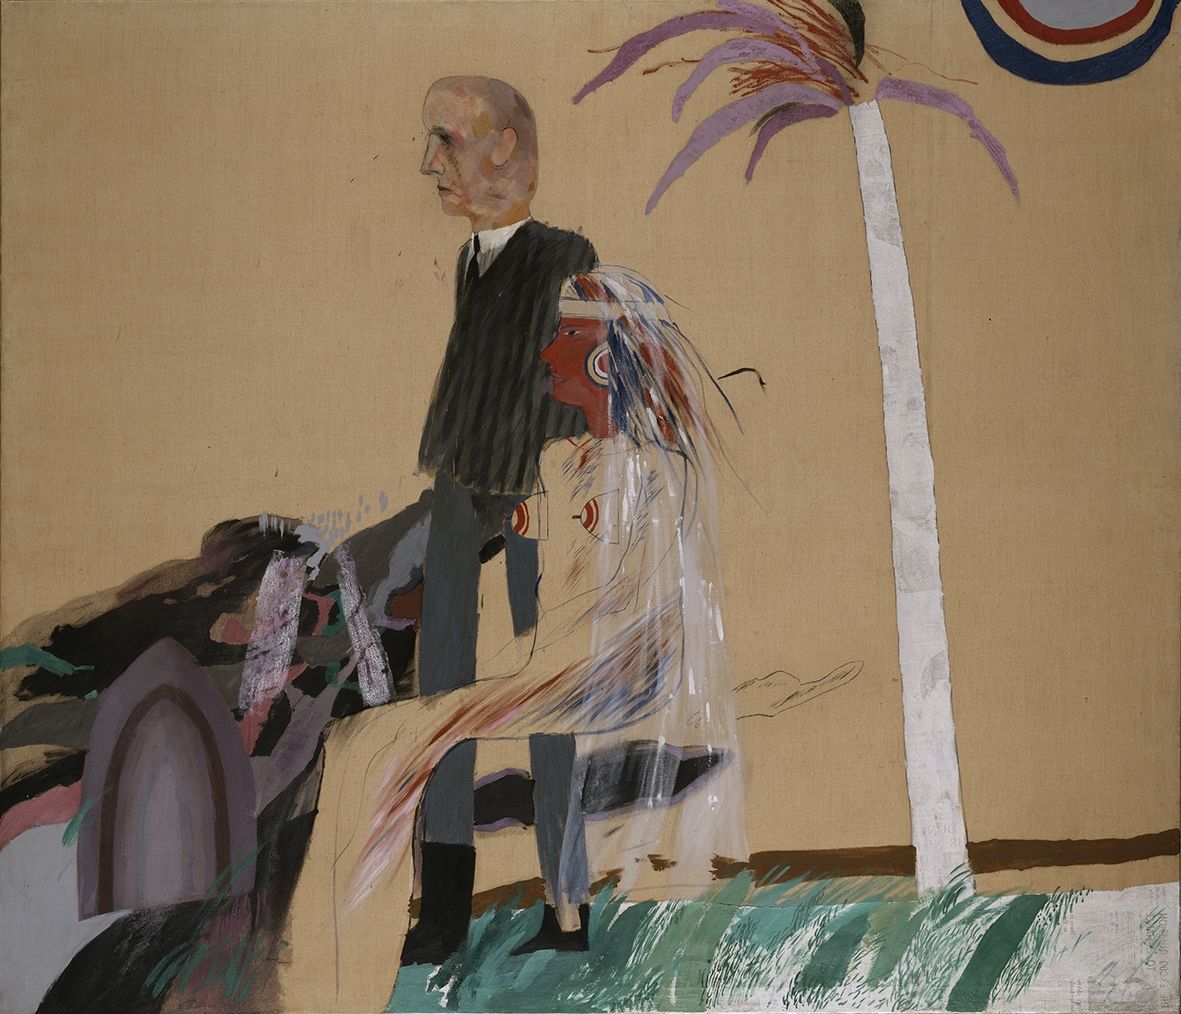 David Hockney, The First Marriage (A Marriage of Styles I), 1962, Öl auf Leinwand, 182,9 x 214 cm, Tate: Presented by the Friends of the Tate Gallery 1963 © David Hockney, Foto: Tate